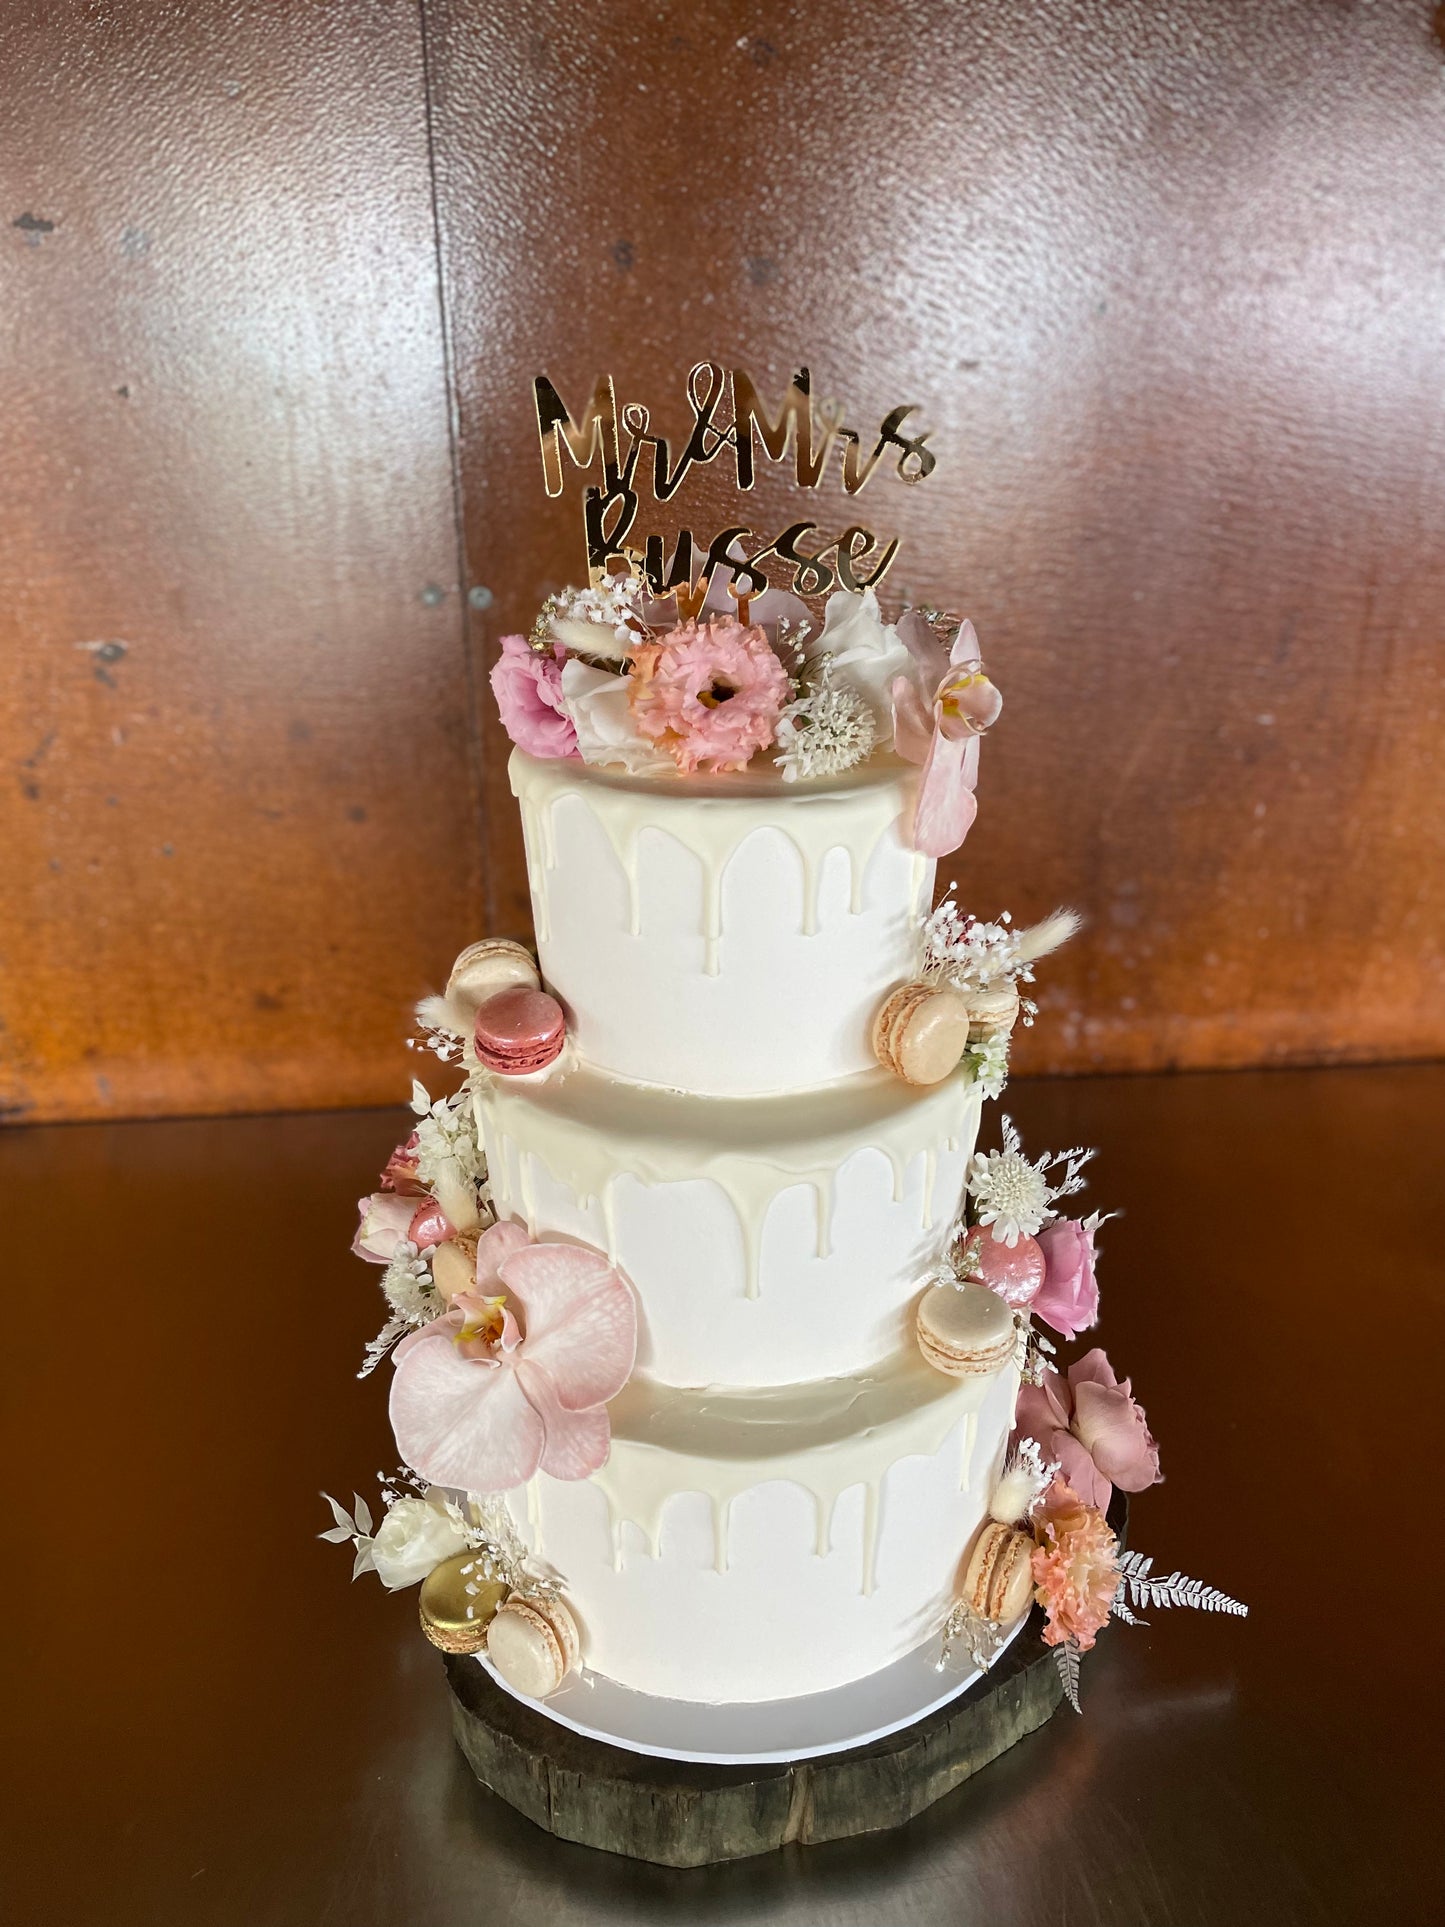 3 Tier Buttercream with Drizzle & Fresh Flowers